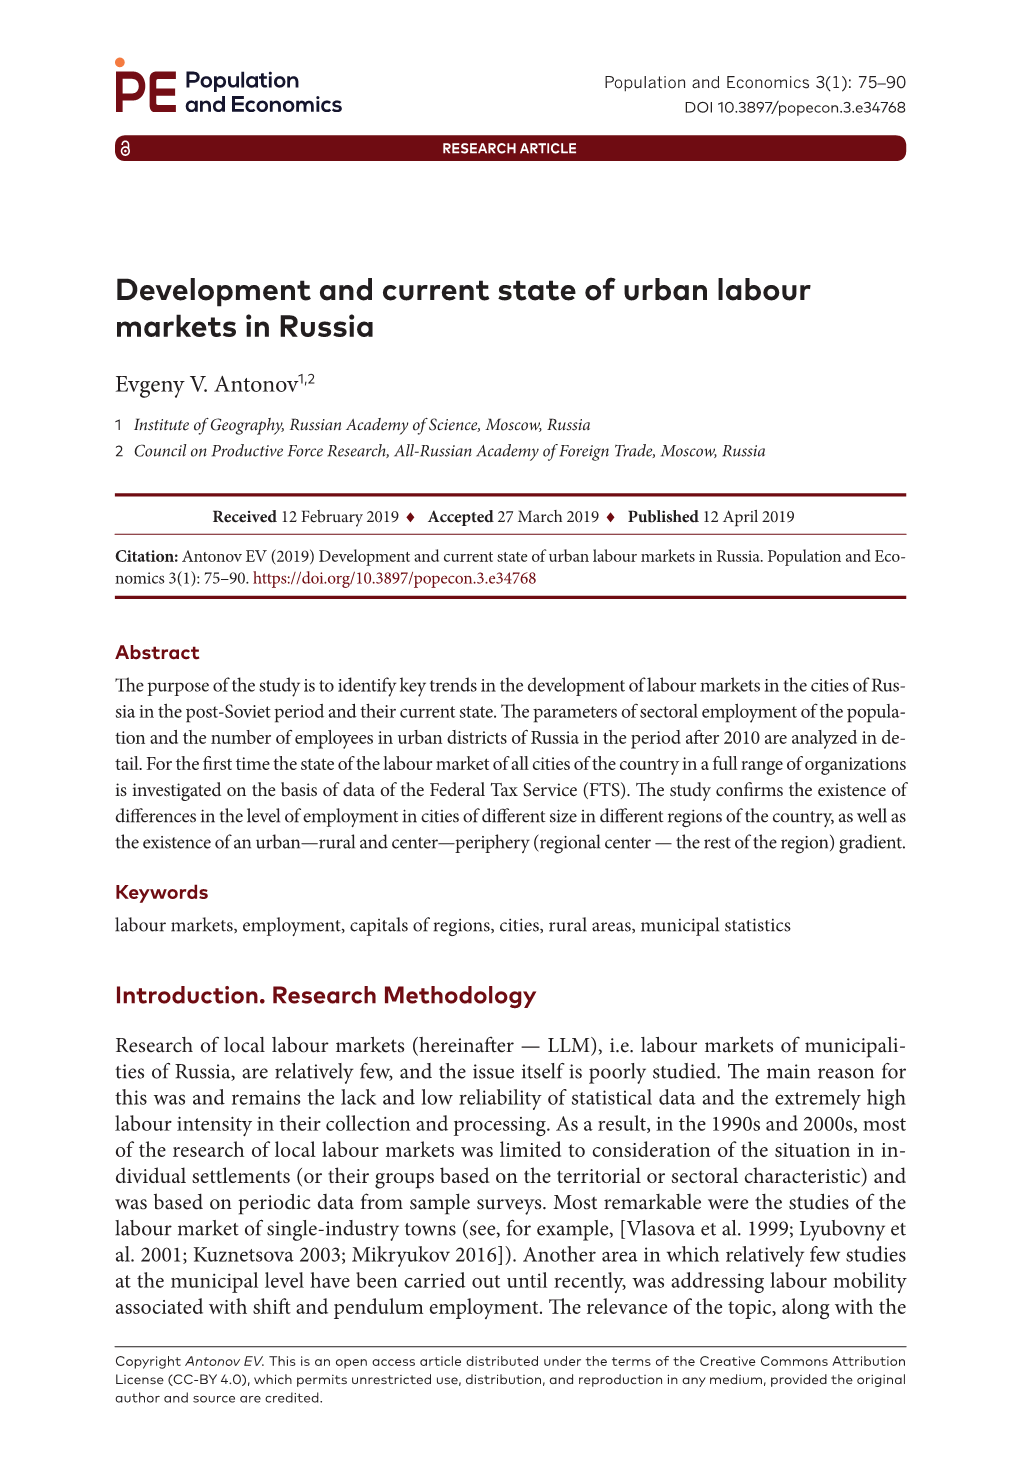 Development and Current State of Urban Labour Markets in Russia